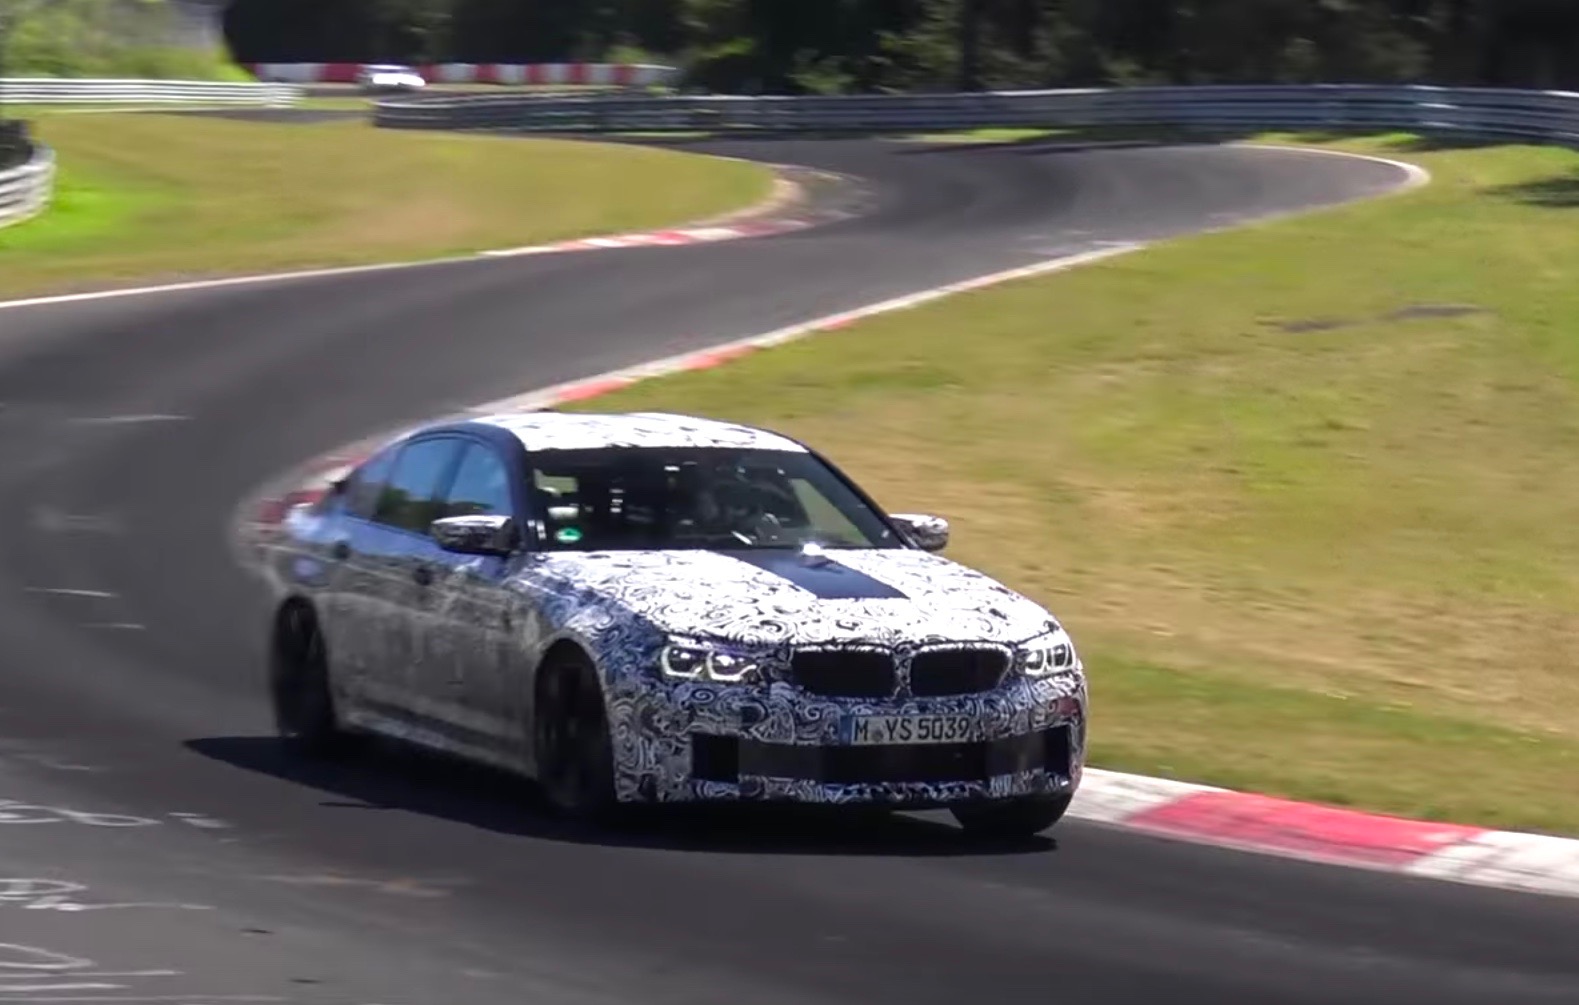 2018 BMW M5 F90 spotted again, looks powerful (video)